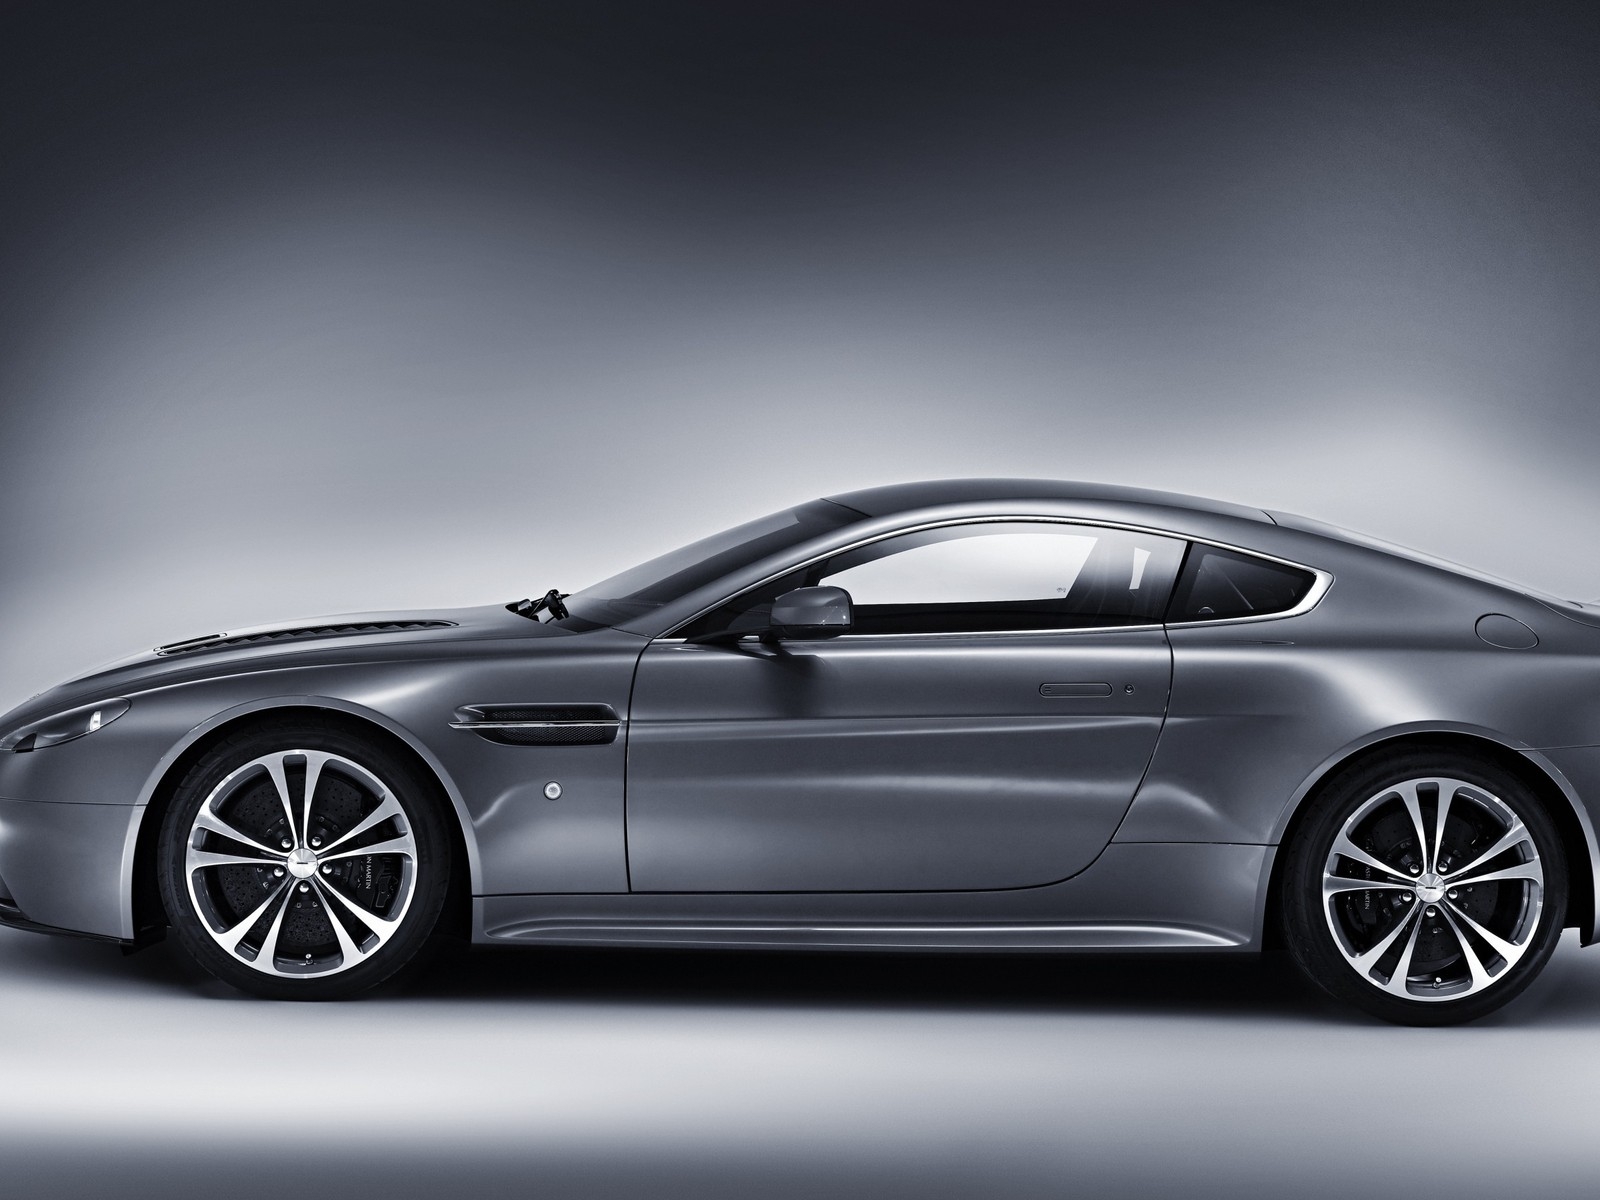 Aston Martin V12 Vantage Front View for 1600 x 1200 resolution